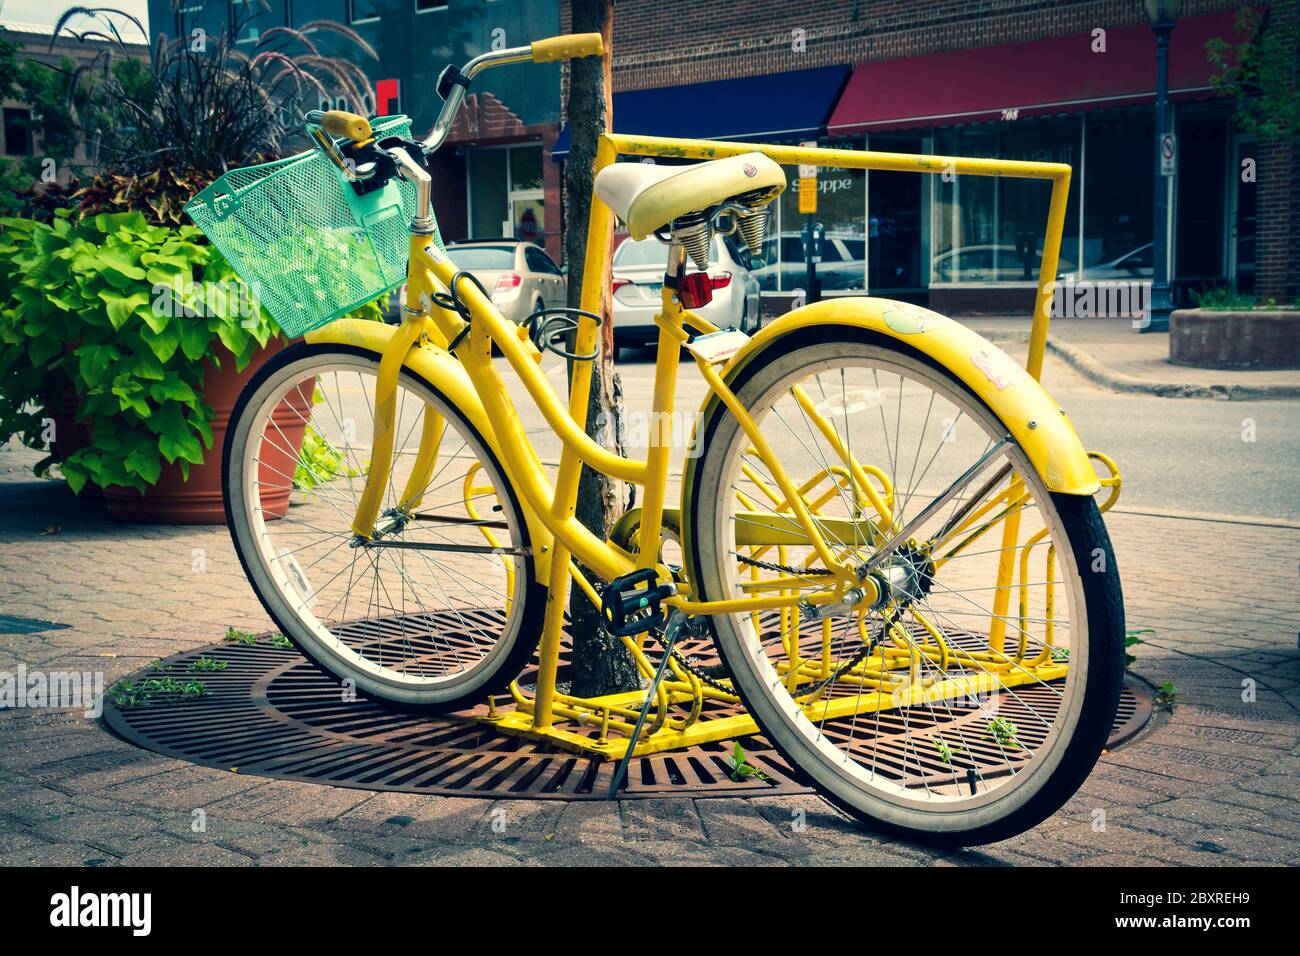 A parked retro style yellow girl's bicycle with teal green basket on front locked to a tree in  revitalized downtown in St. Cloud, MN, USA Stock Photo